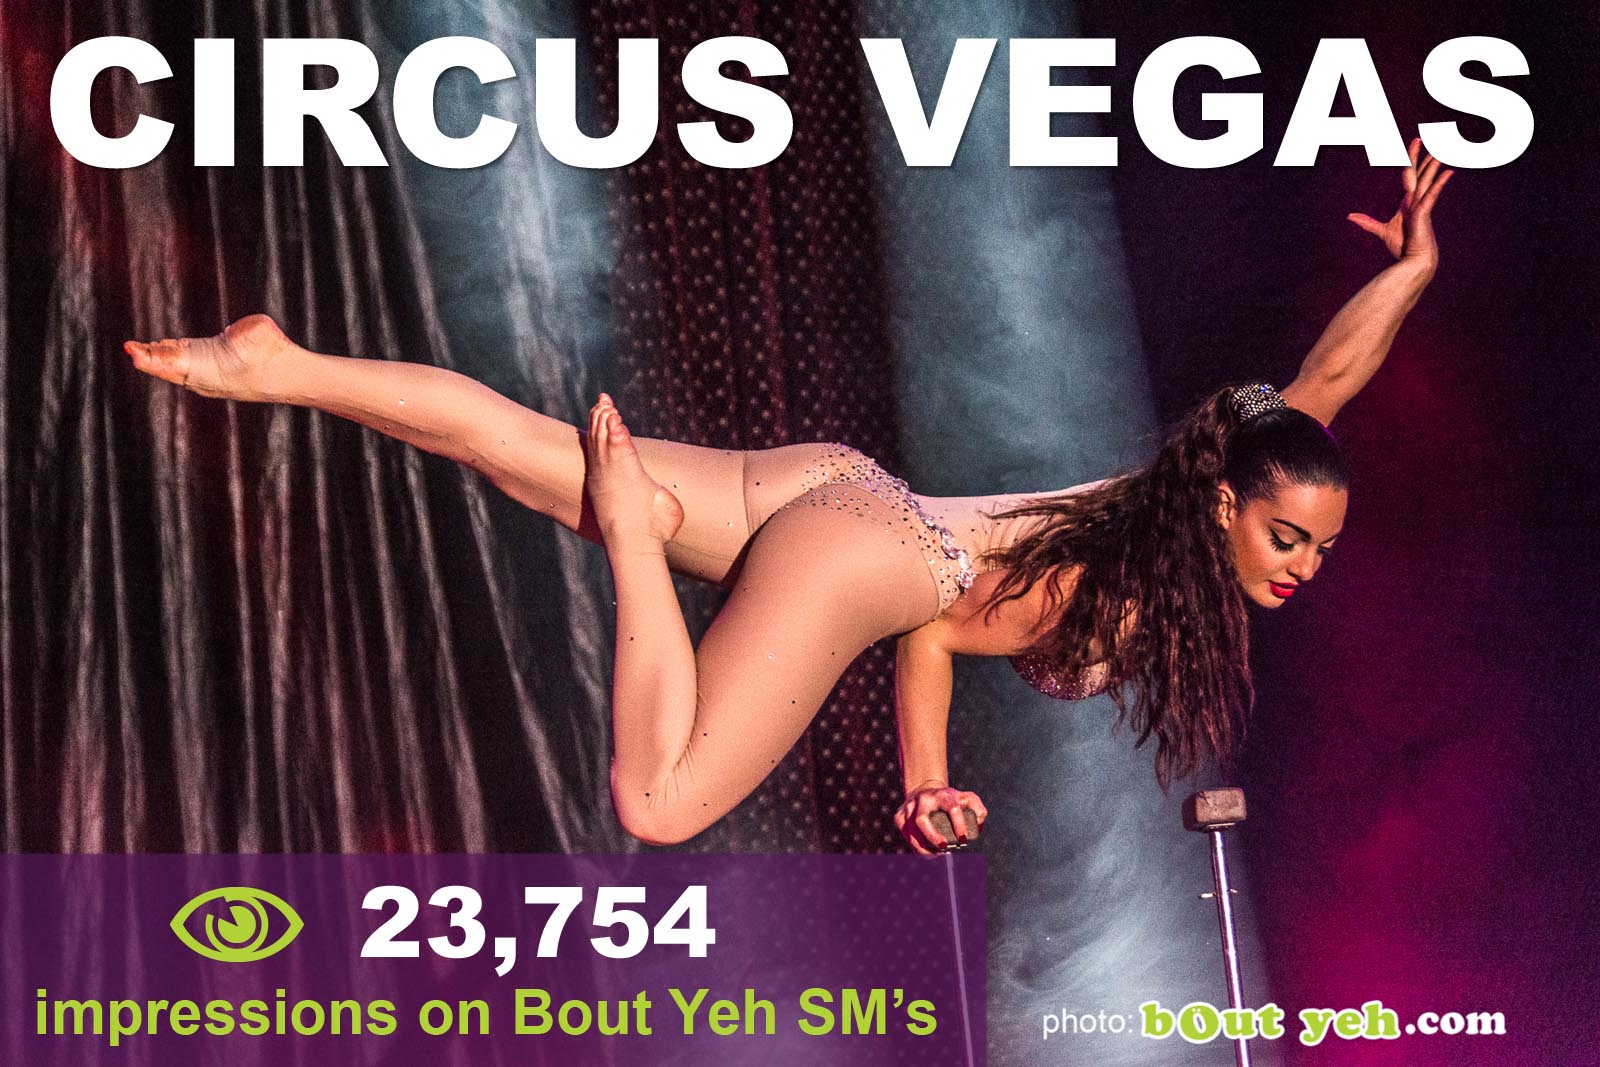 Social Media Marketing Consultants Belfast - Circus Vegas SMM campaign overview photo. Photo by Bout Yeh used in a Social Media Marketing campaign across Bout Yeh's Social Media platforms for Circus Vegas On Wheels, Ireland